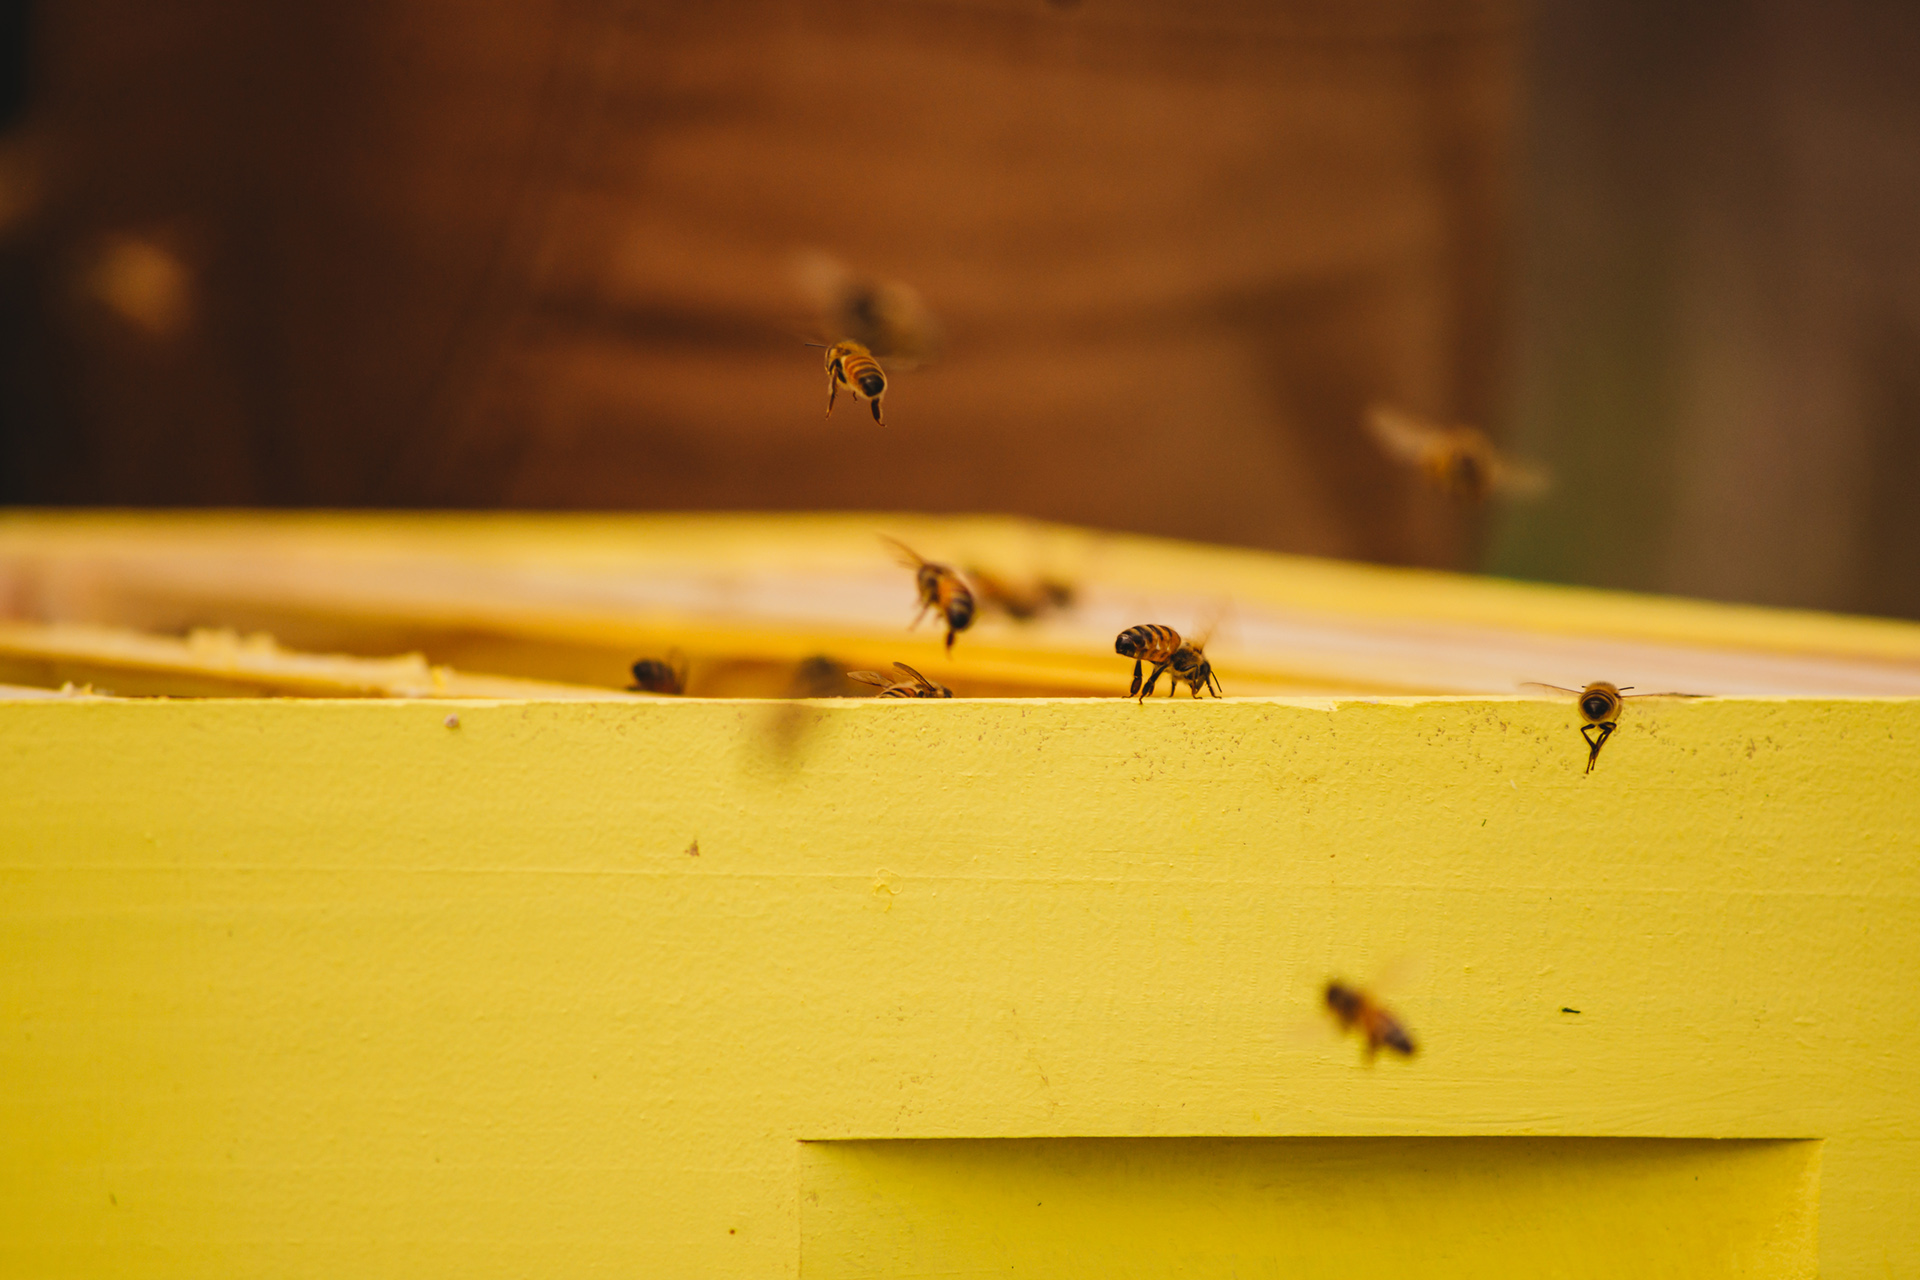 bees buzzing around a yellow beehive